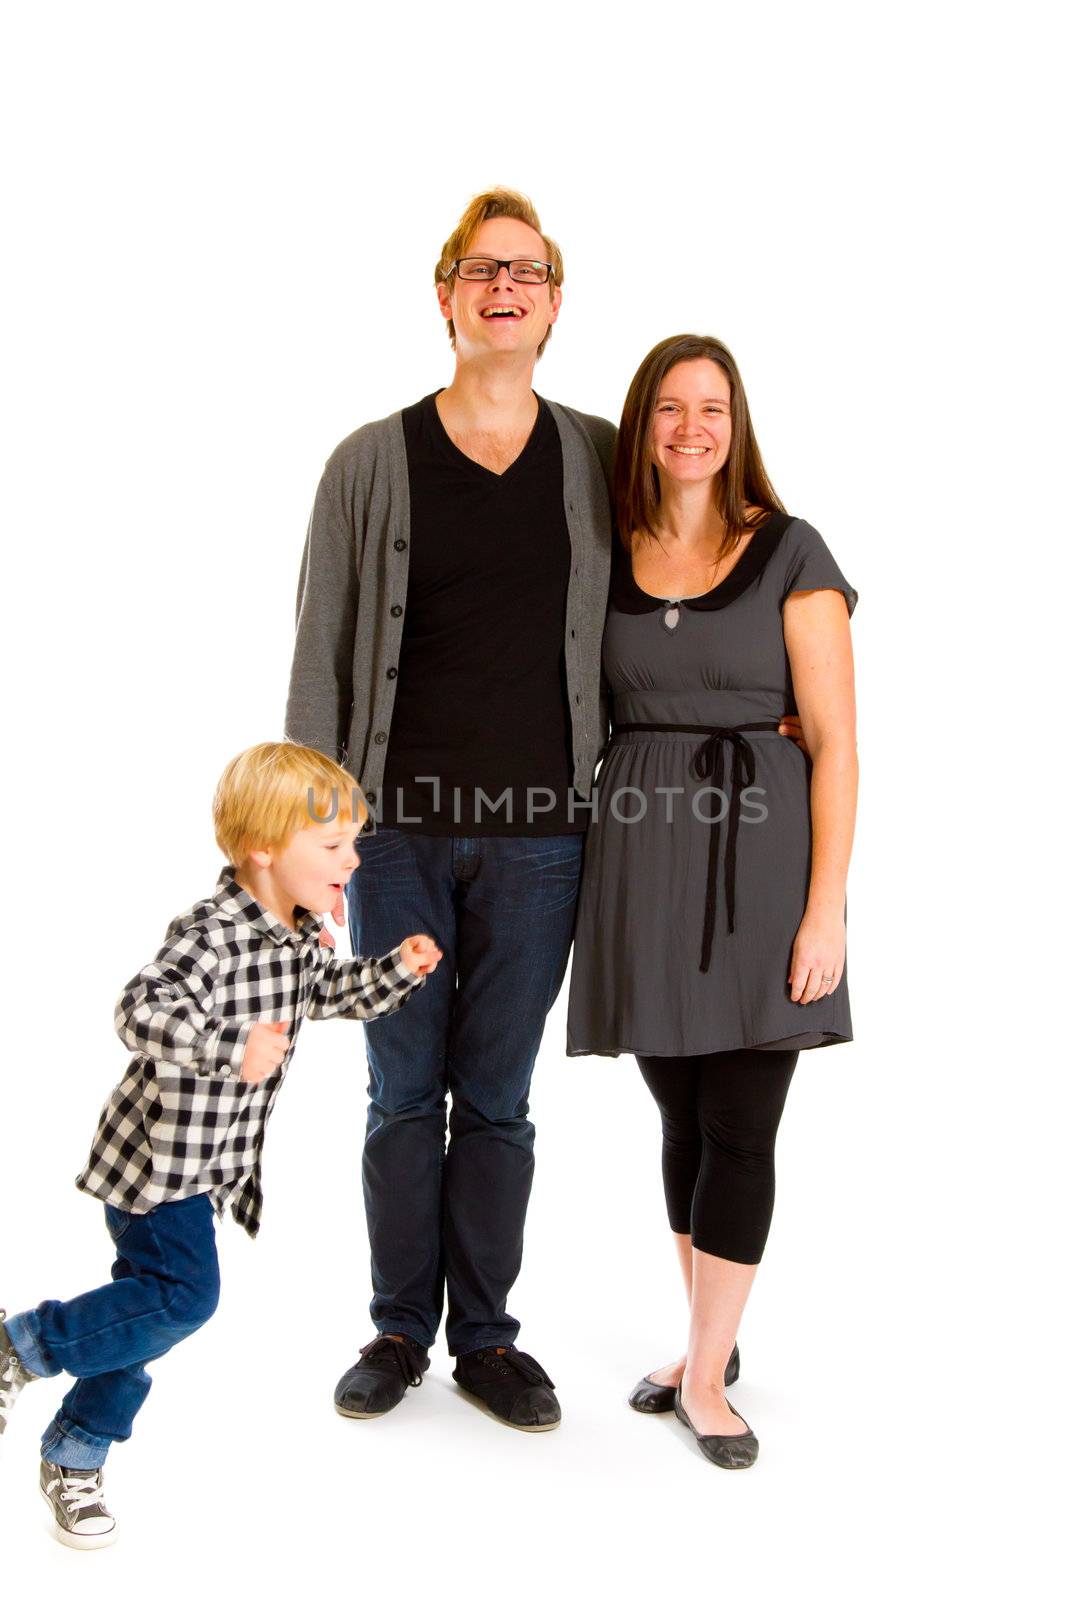 A couple stands there as their children run circles around them in the studio against an isolated white background.